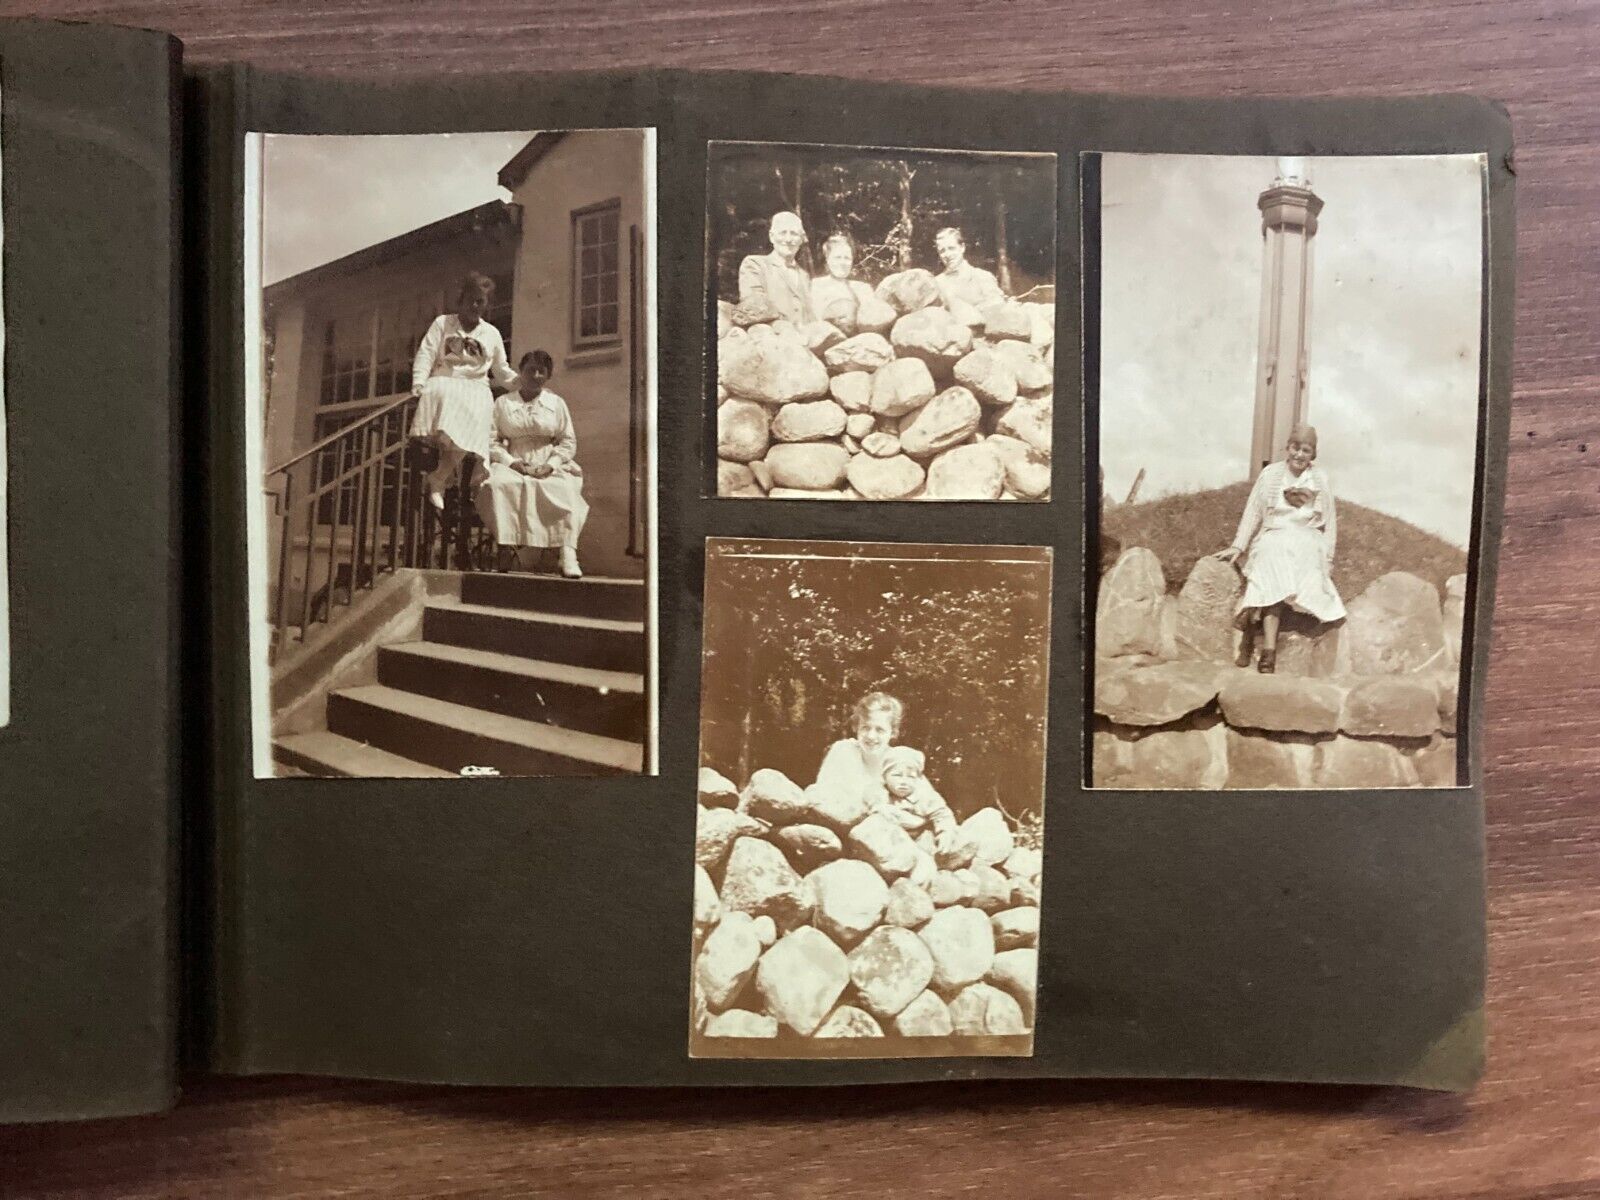 Daily Family Life in Denmark Early 1900s Unique Vintage Photo Album +75 pcs